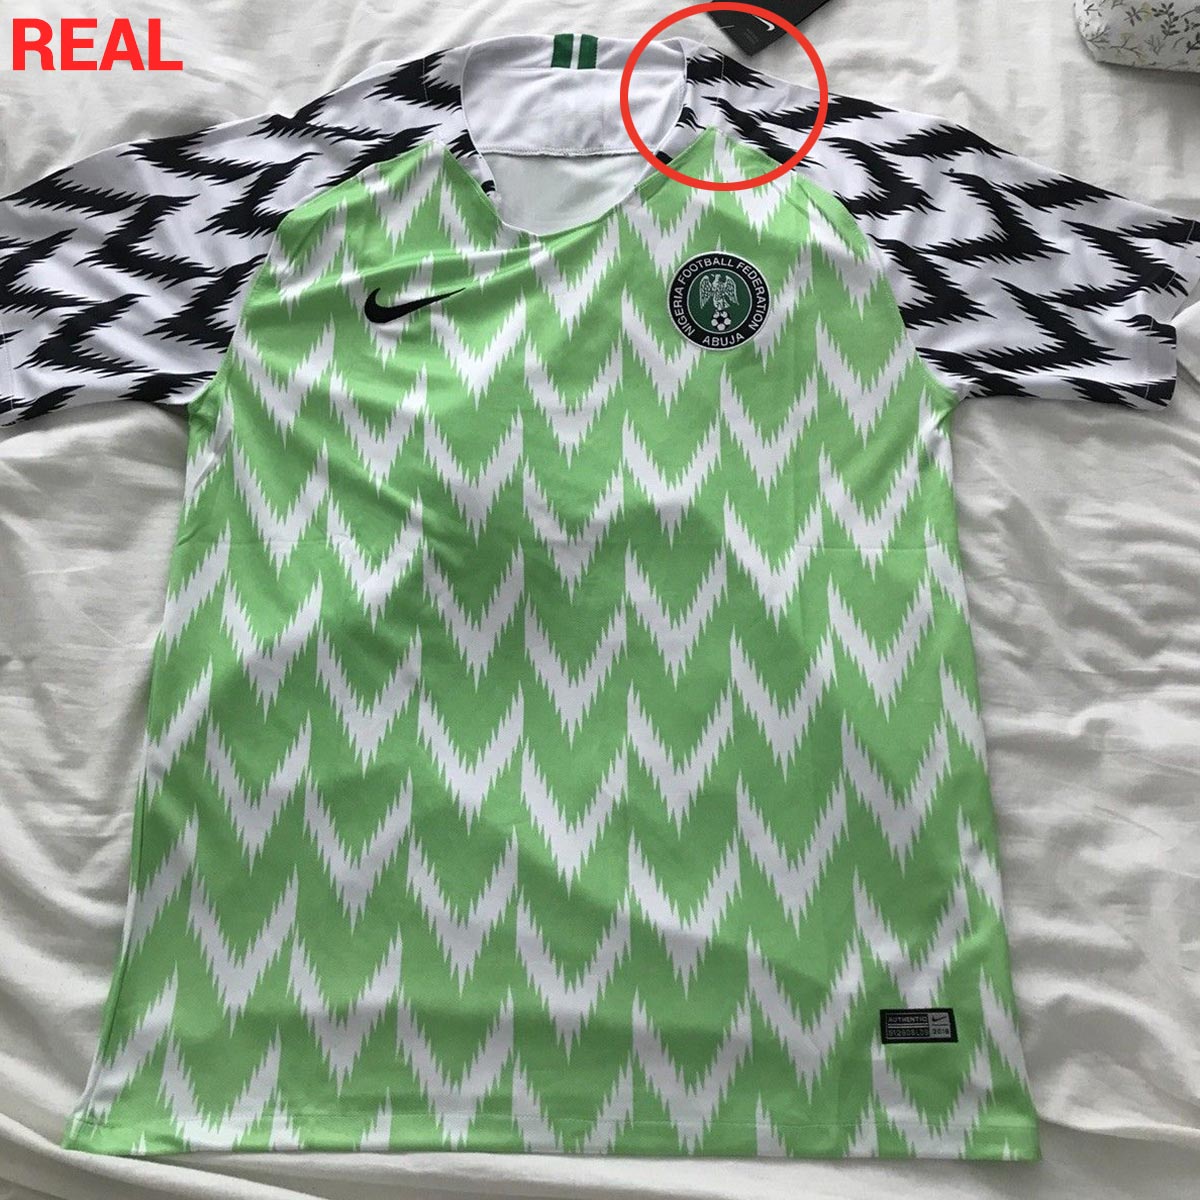 Be Aware - To Detect A Nike Nigeria 2018 World Cup Kit - Headlines